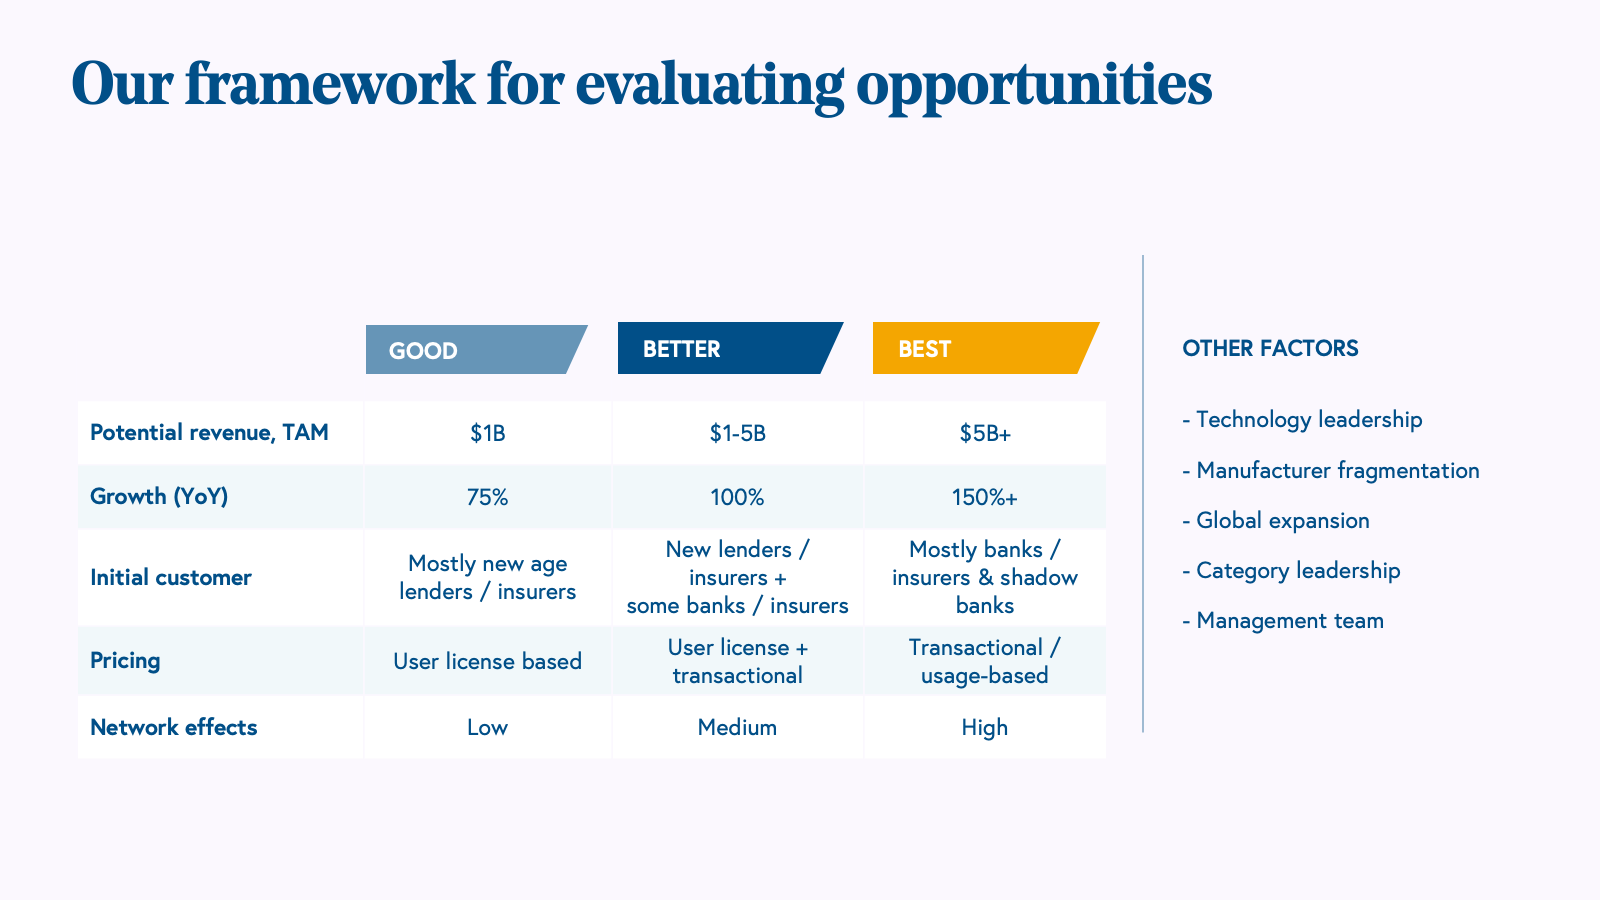 Our framework for evaluating opportunities